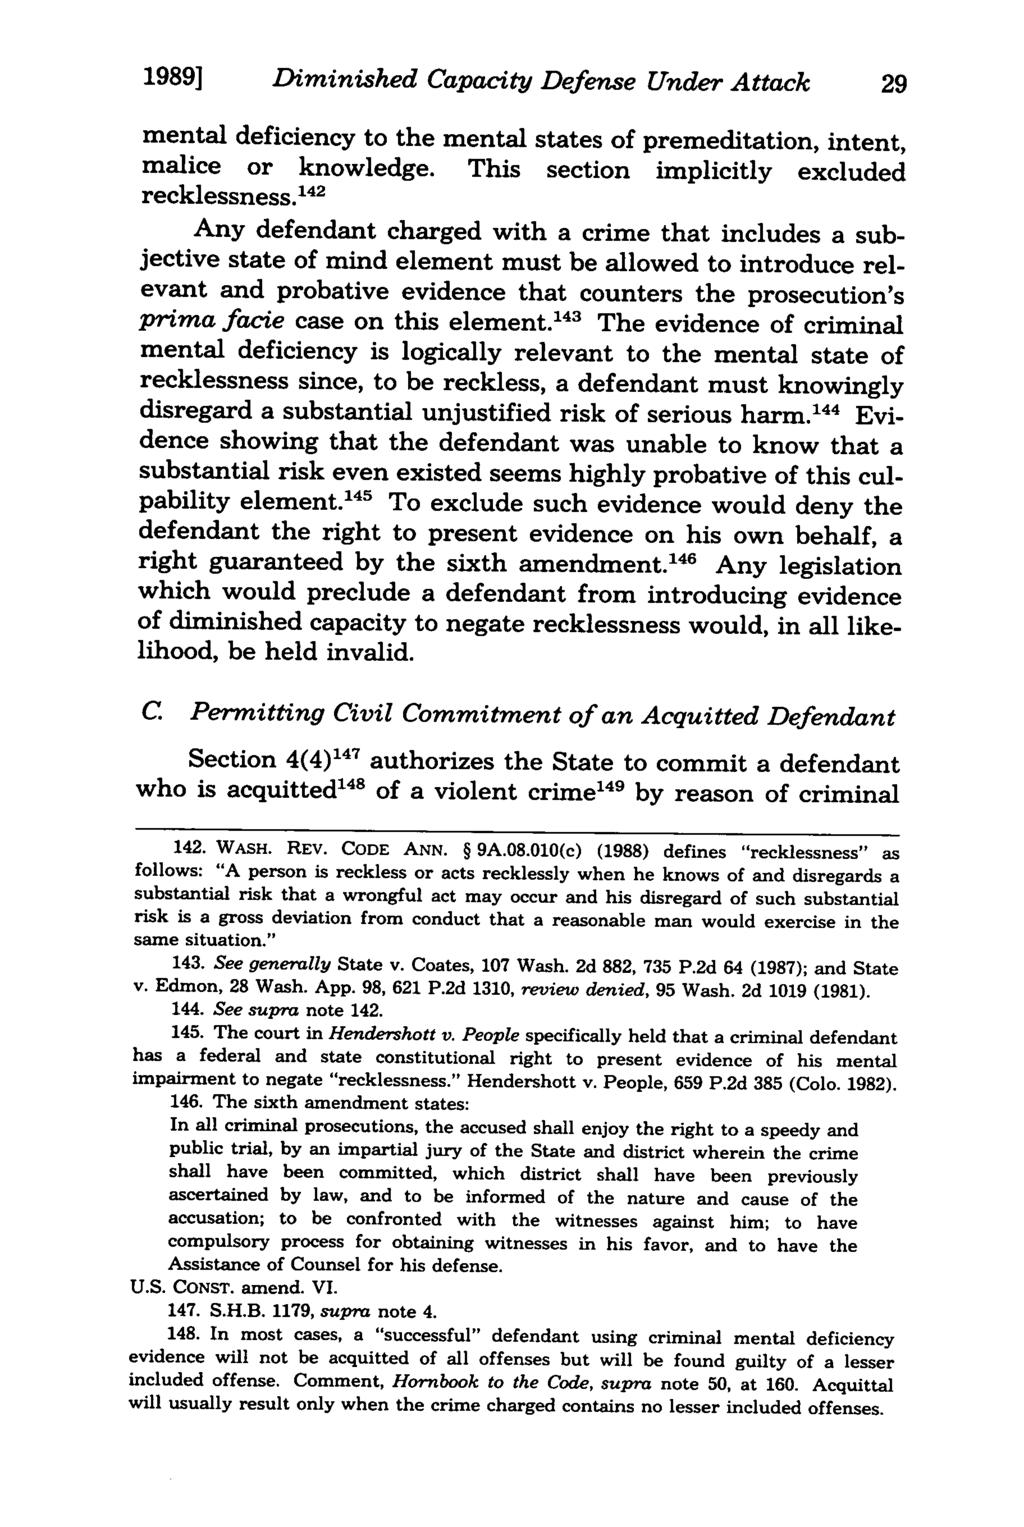 1989] Diminished Capacity Defense Under Attack mental deficiency to the mental states of premeditation, intent, malice or knowledge. This section implicitly excluded recklessness.